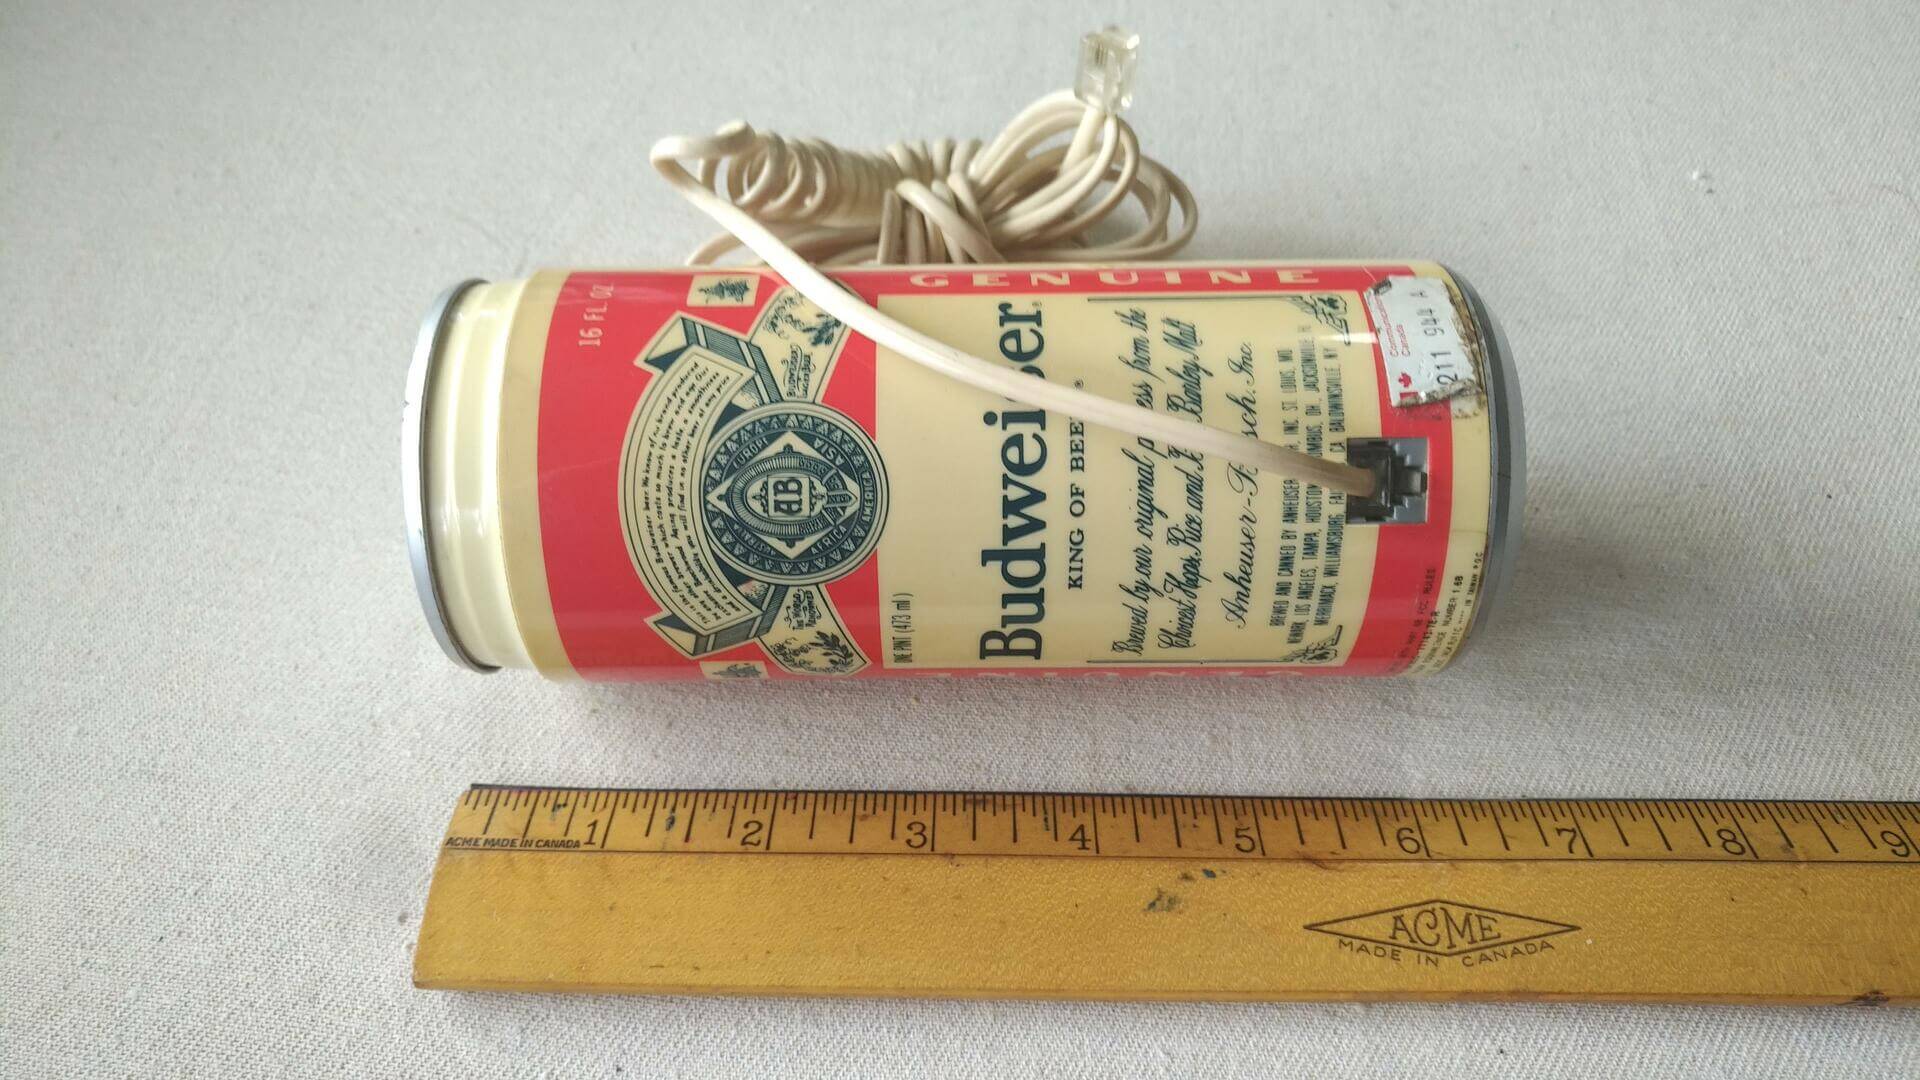 Nice vintage 1980s Budweiser beer can touch tone dial phone with the original cord. Retro breweriana and telephone advertising pub decor collectible